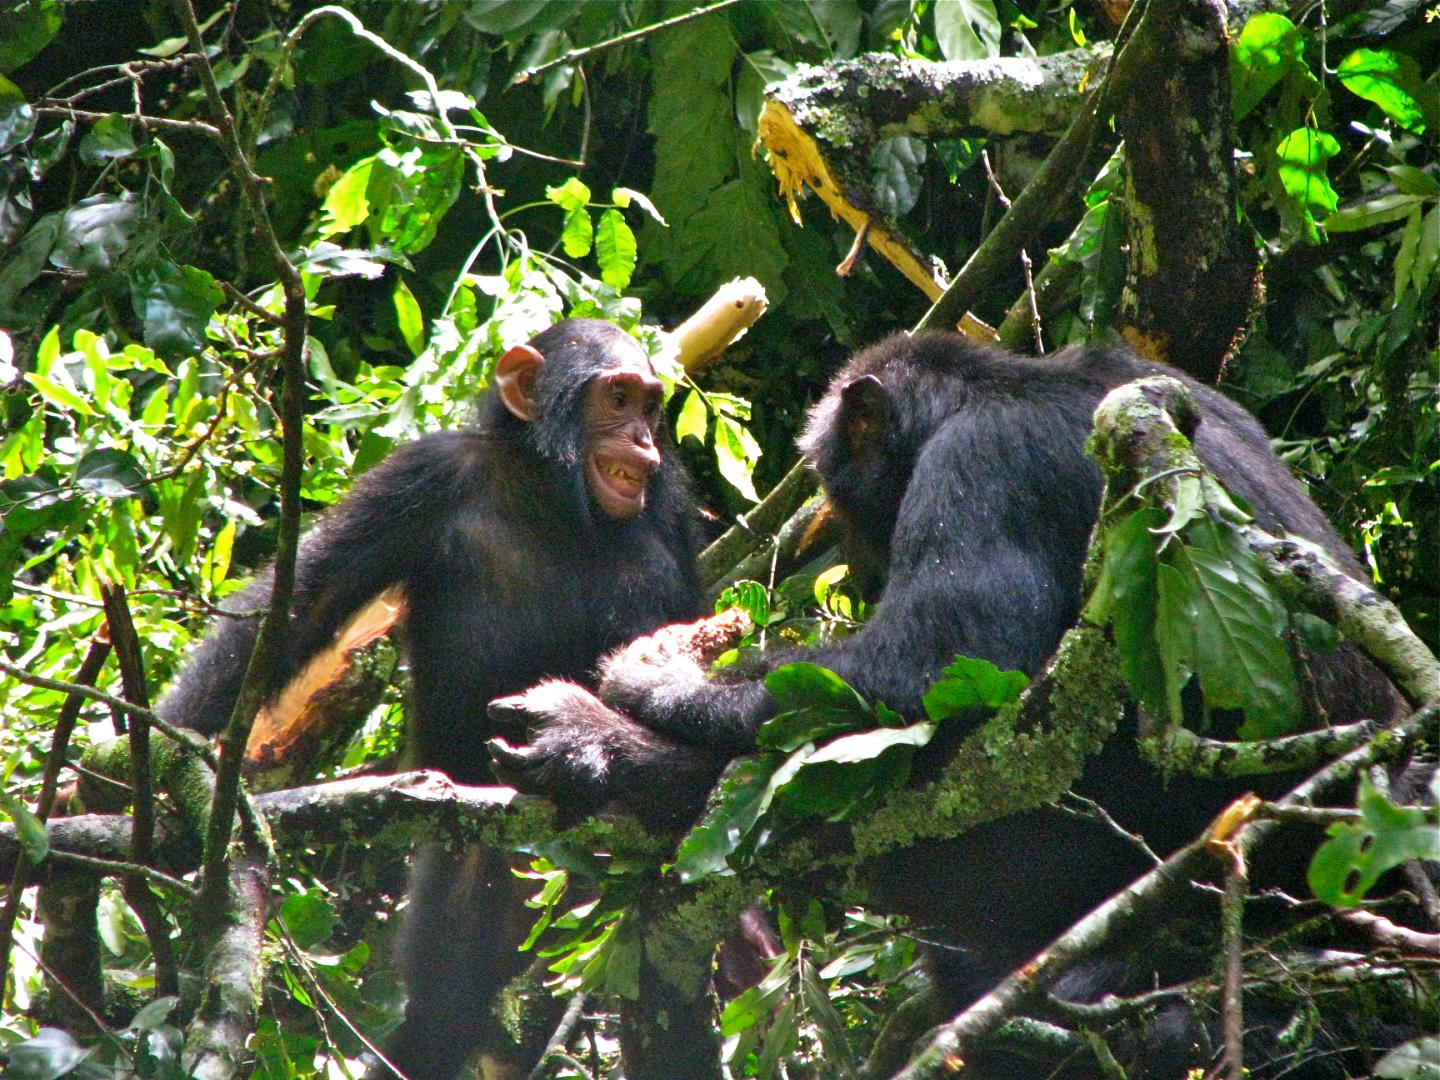 Infant Chimpanzee Gus and Old Male Bartok